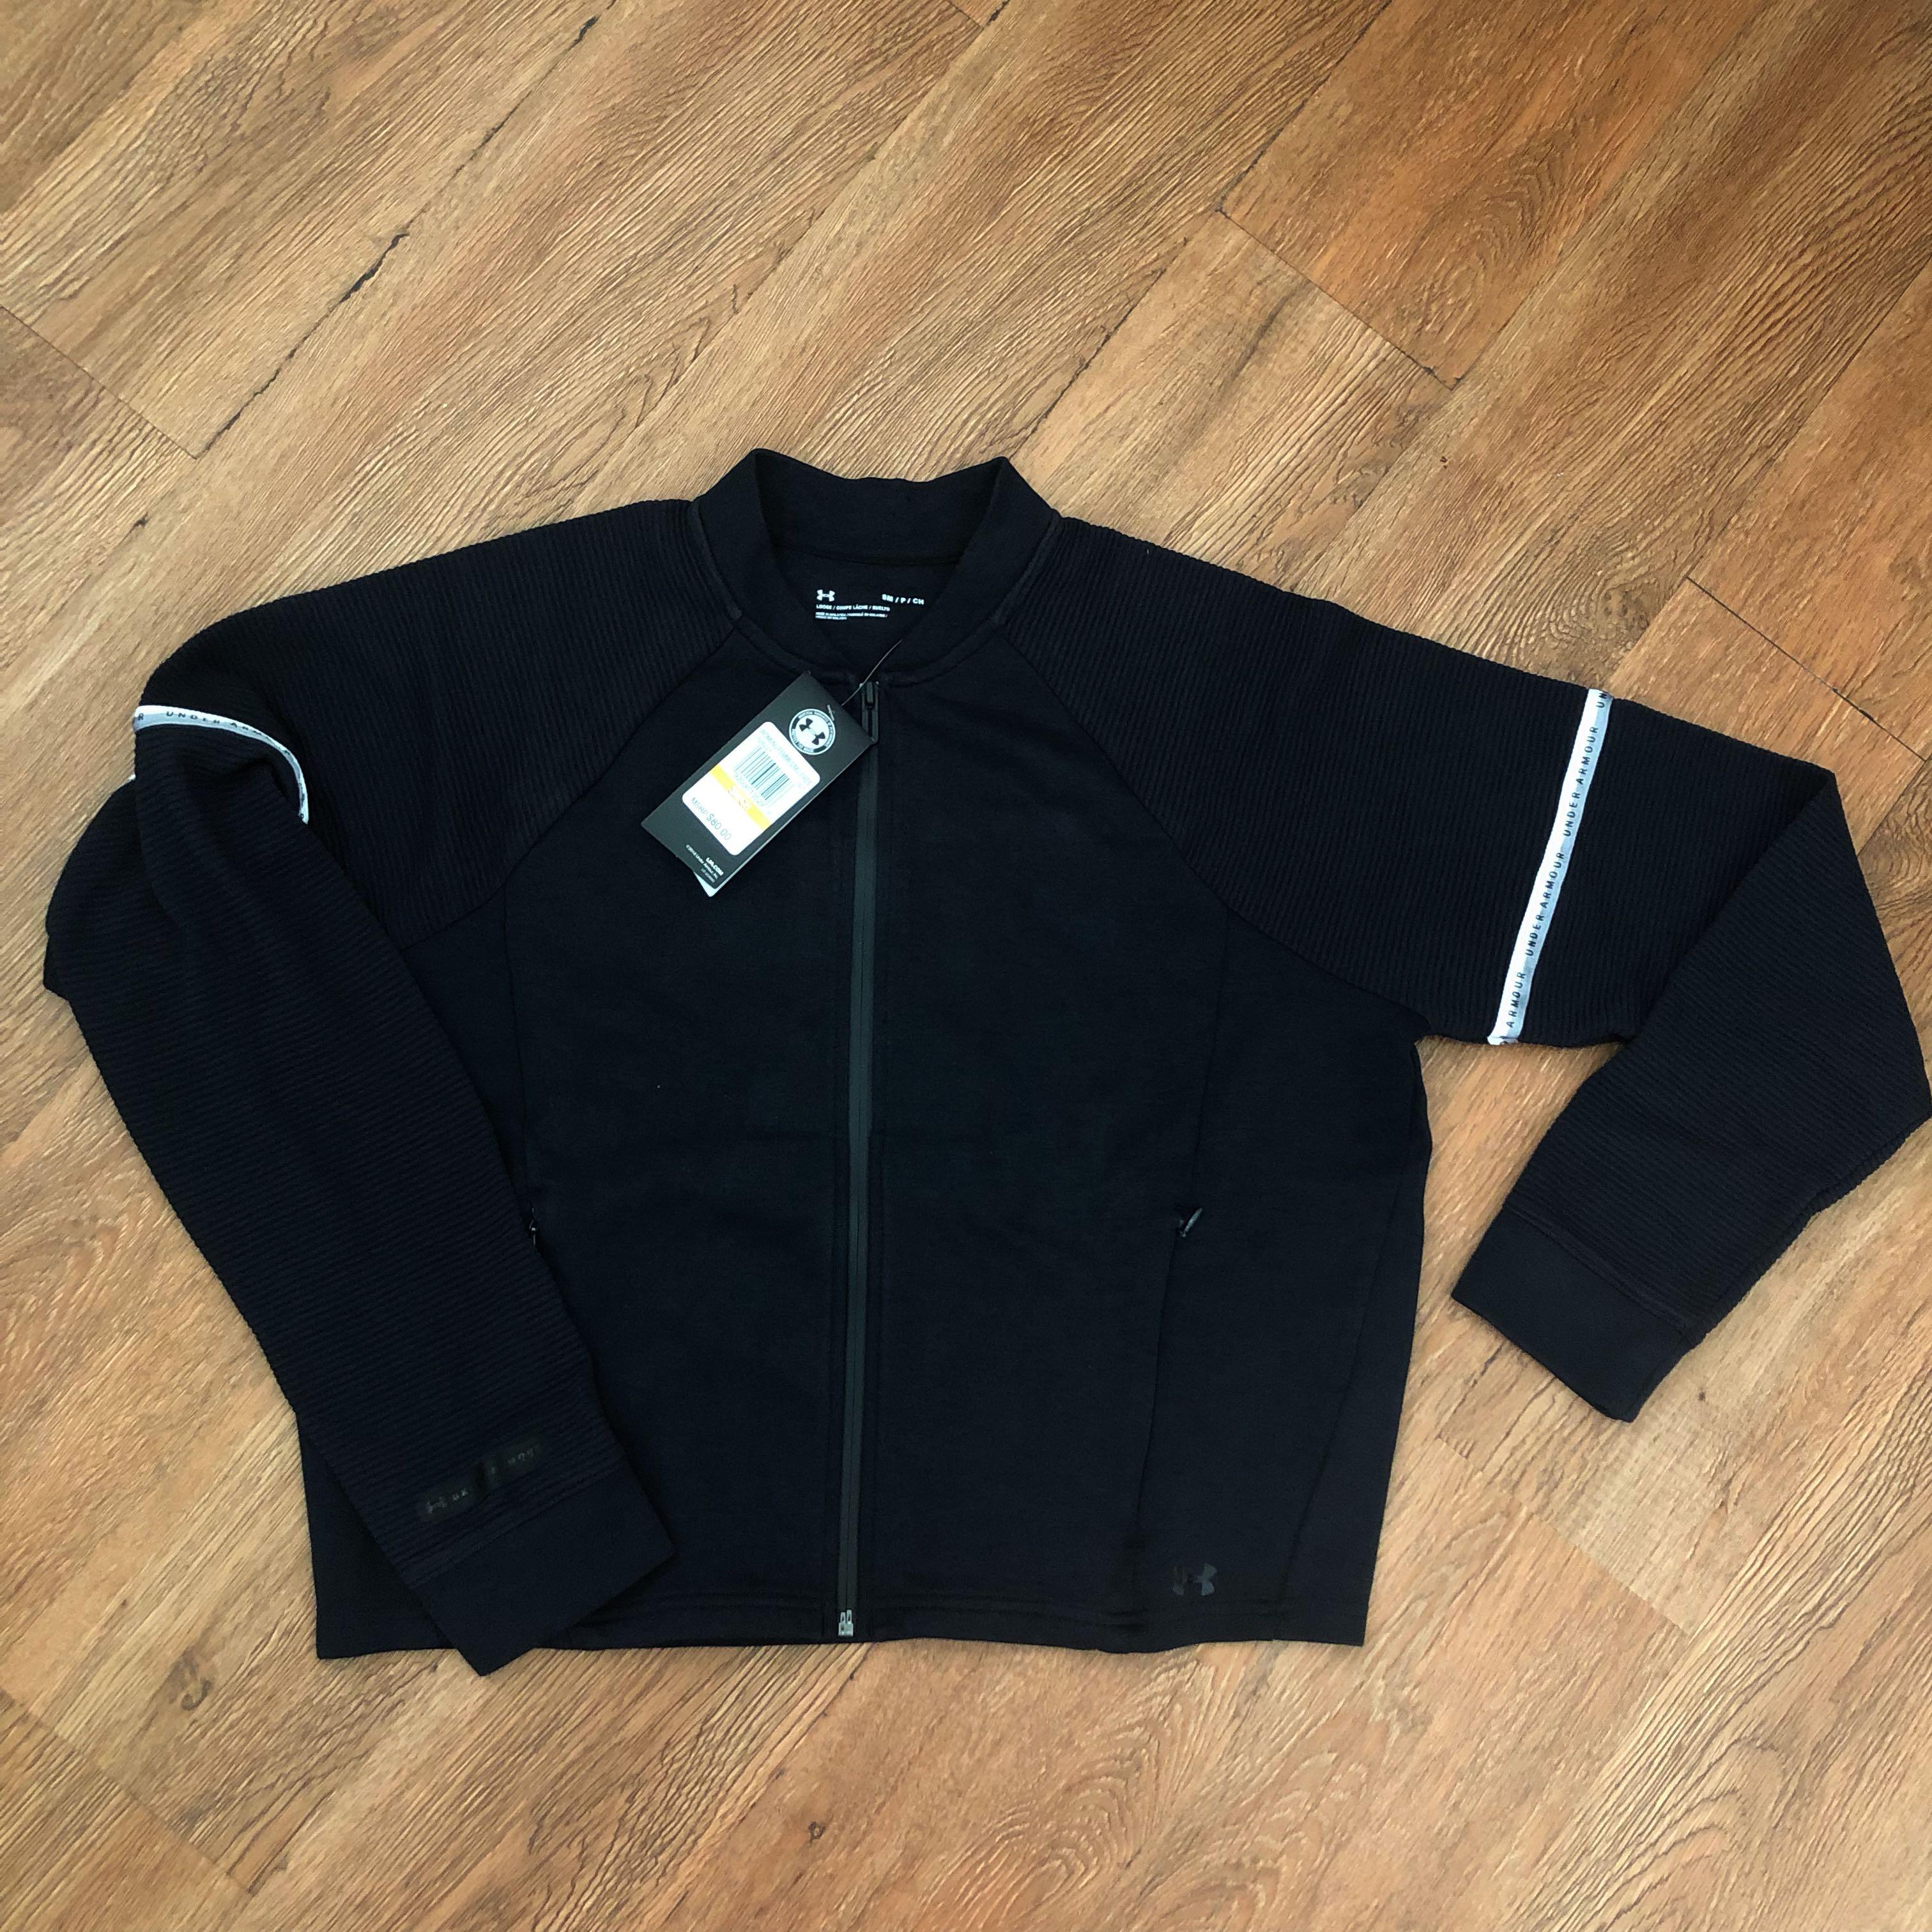 ua unstoppable double knit bomber